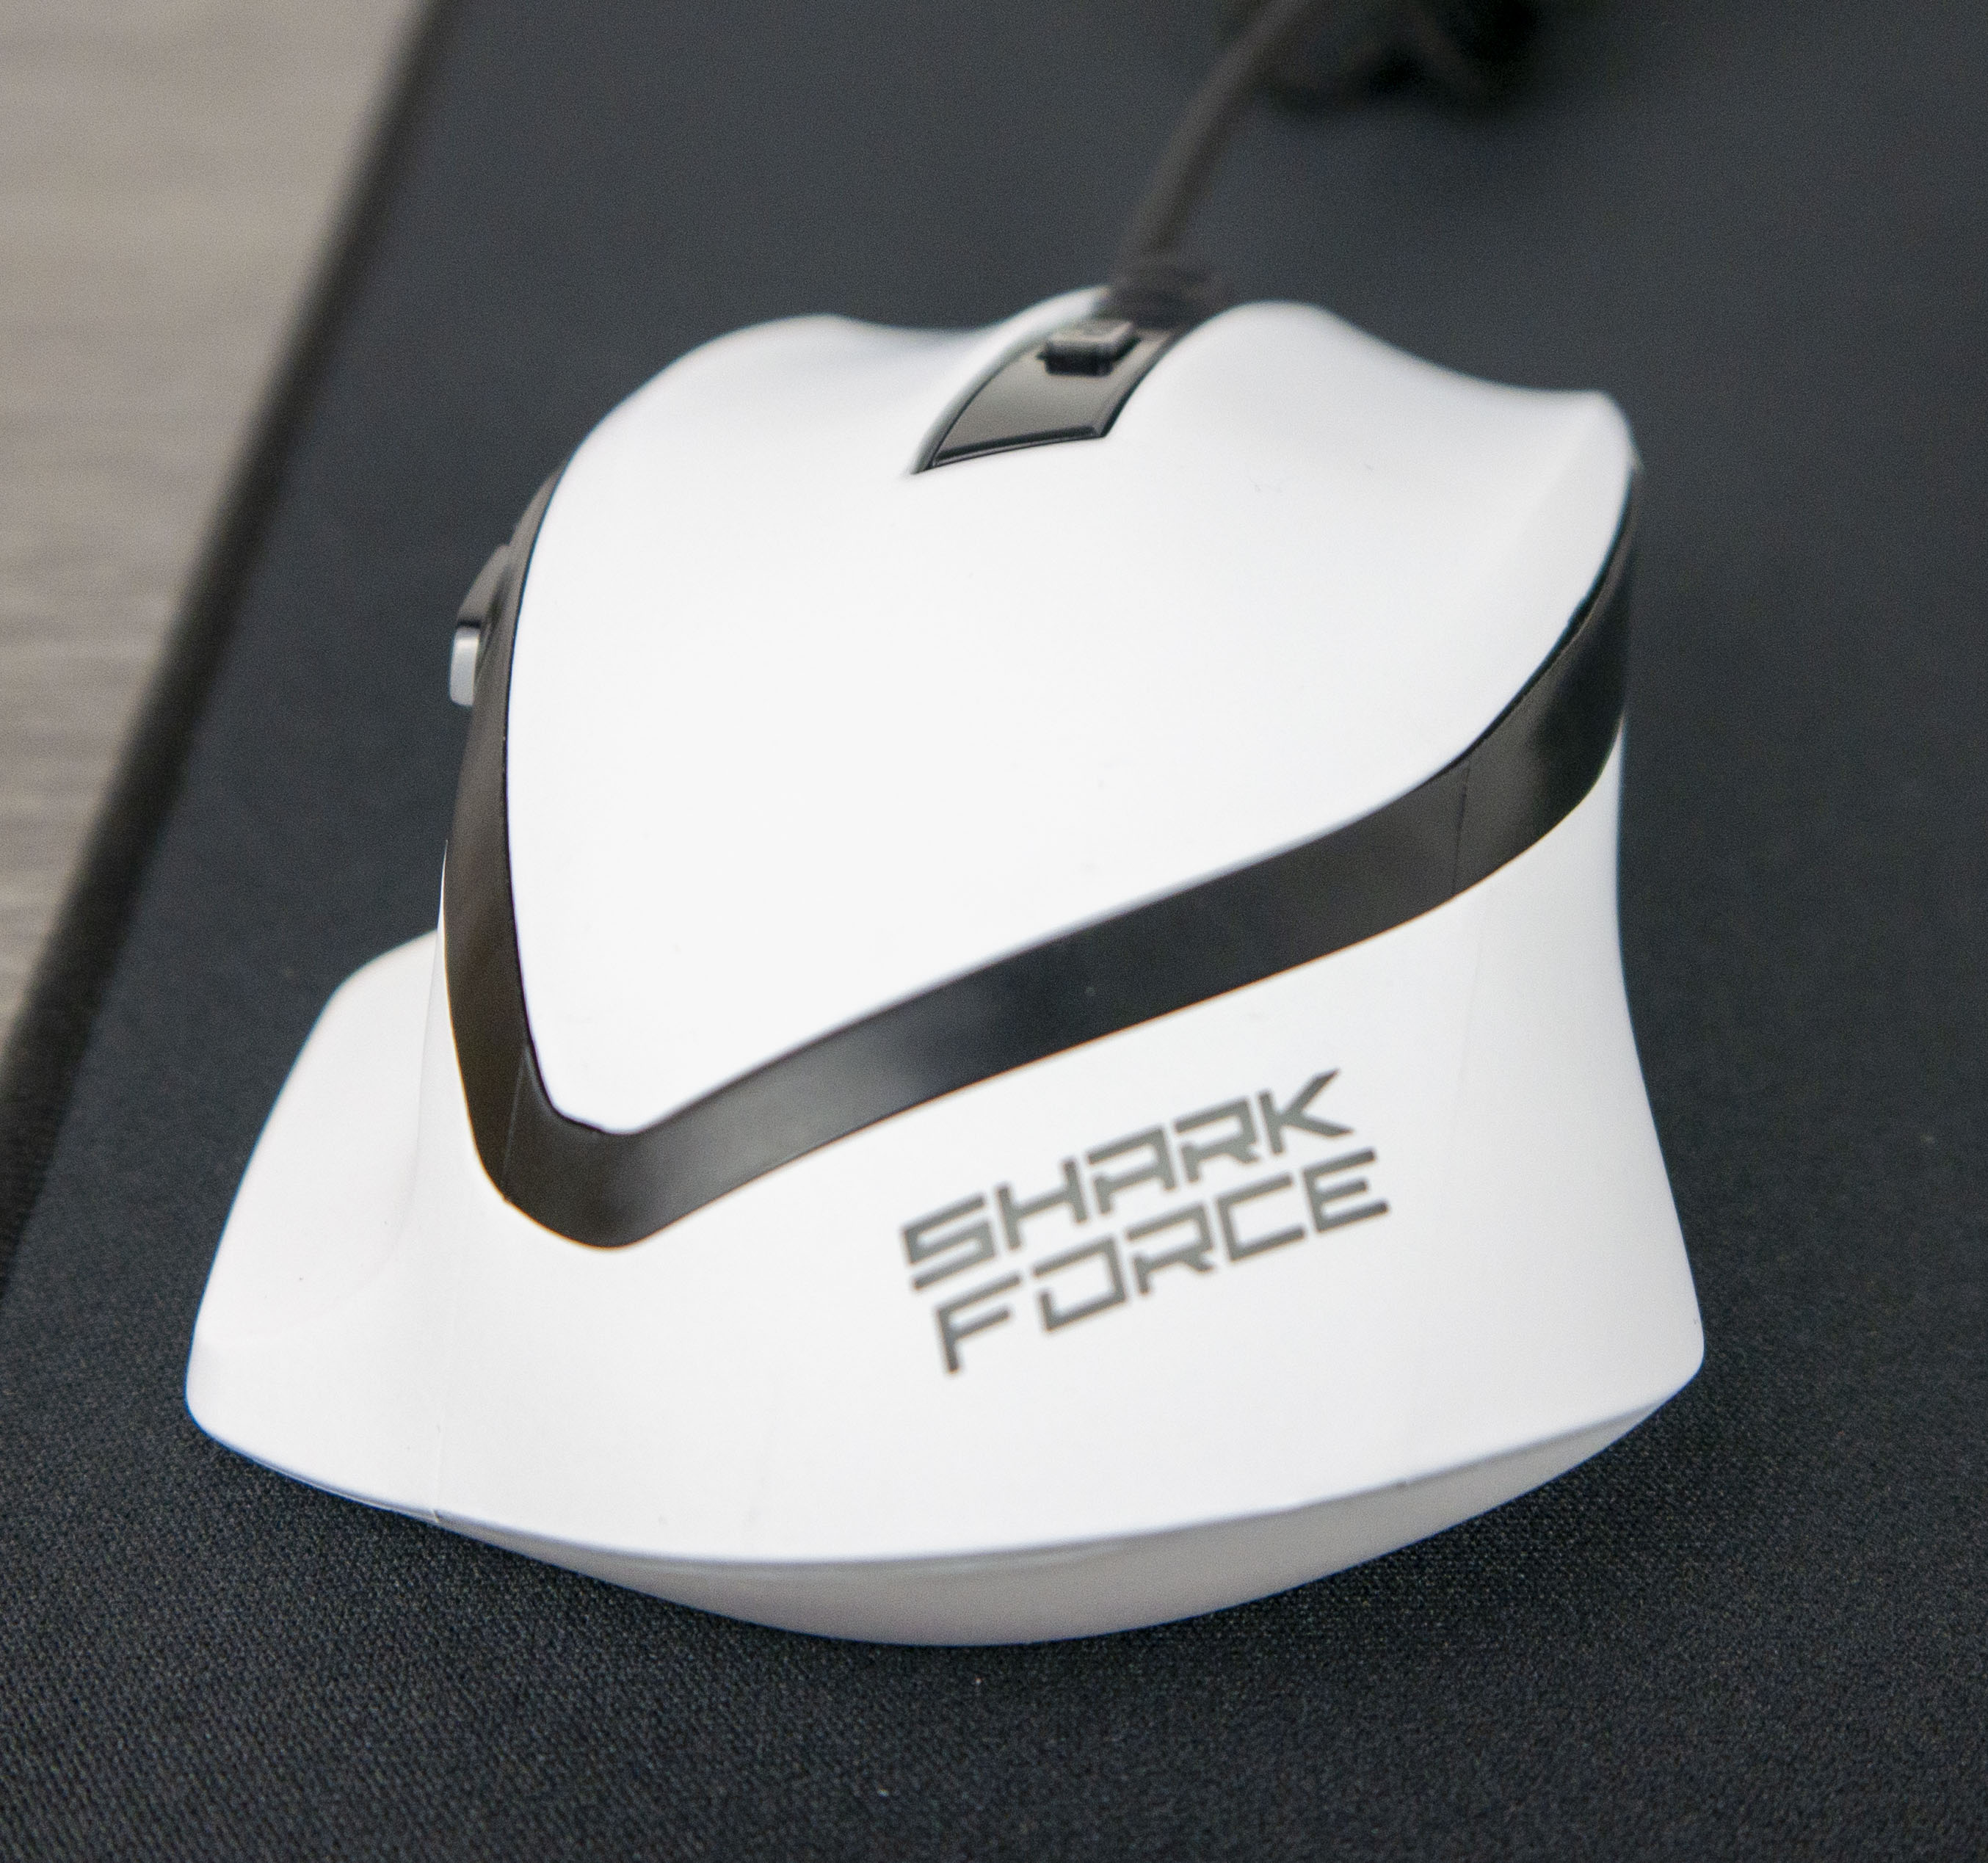 Cheap or low-priced? The Sharkoon Shark Force ll gaming mouse in test